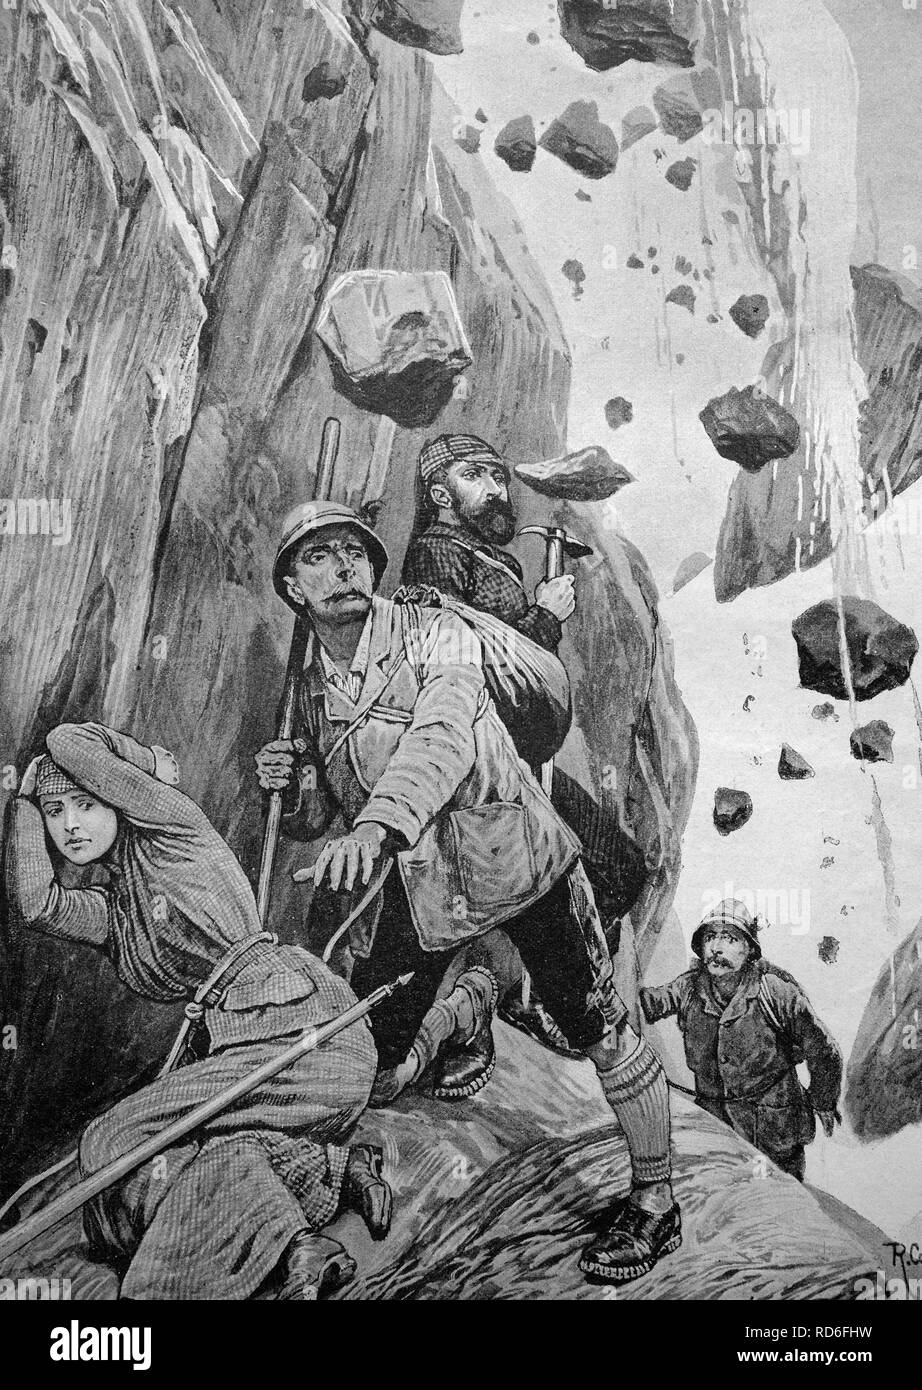 Mountain climbers surprised by a rock fall, historical illustration, ca. 1893 Stock Photo